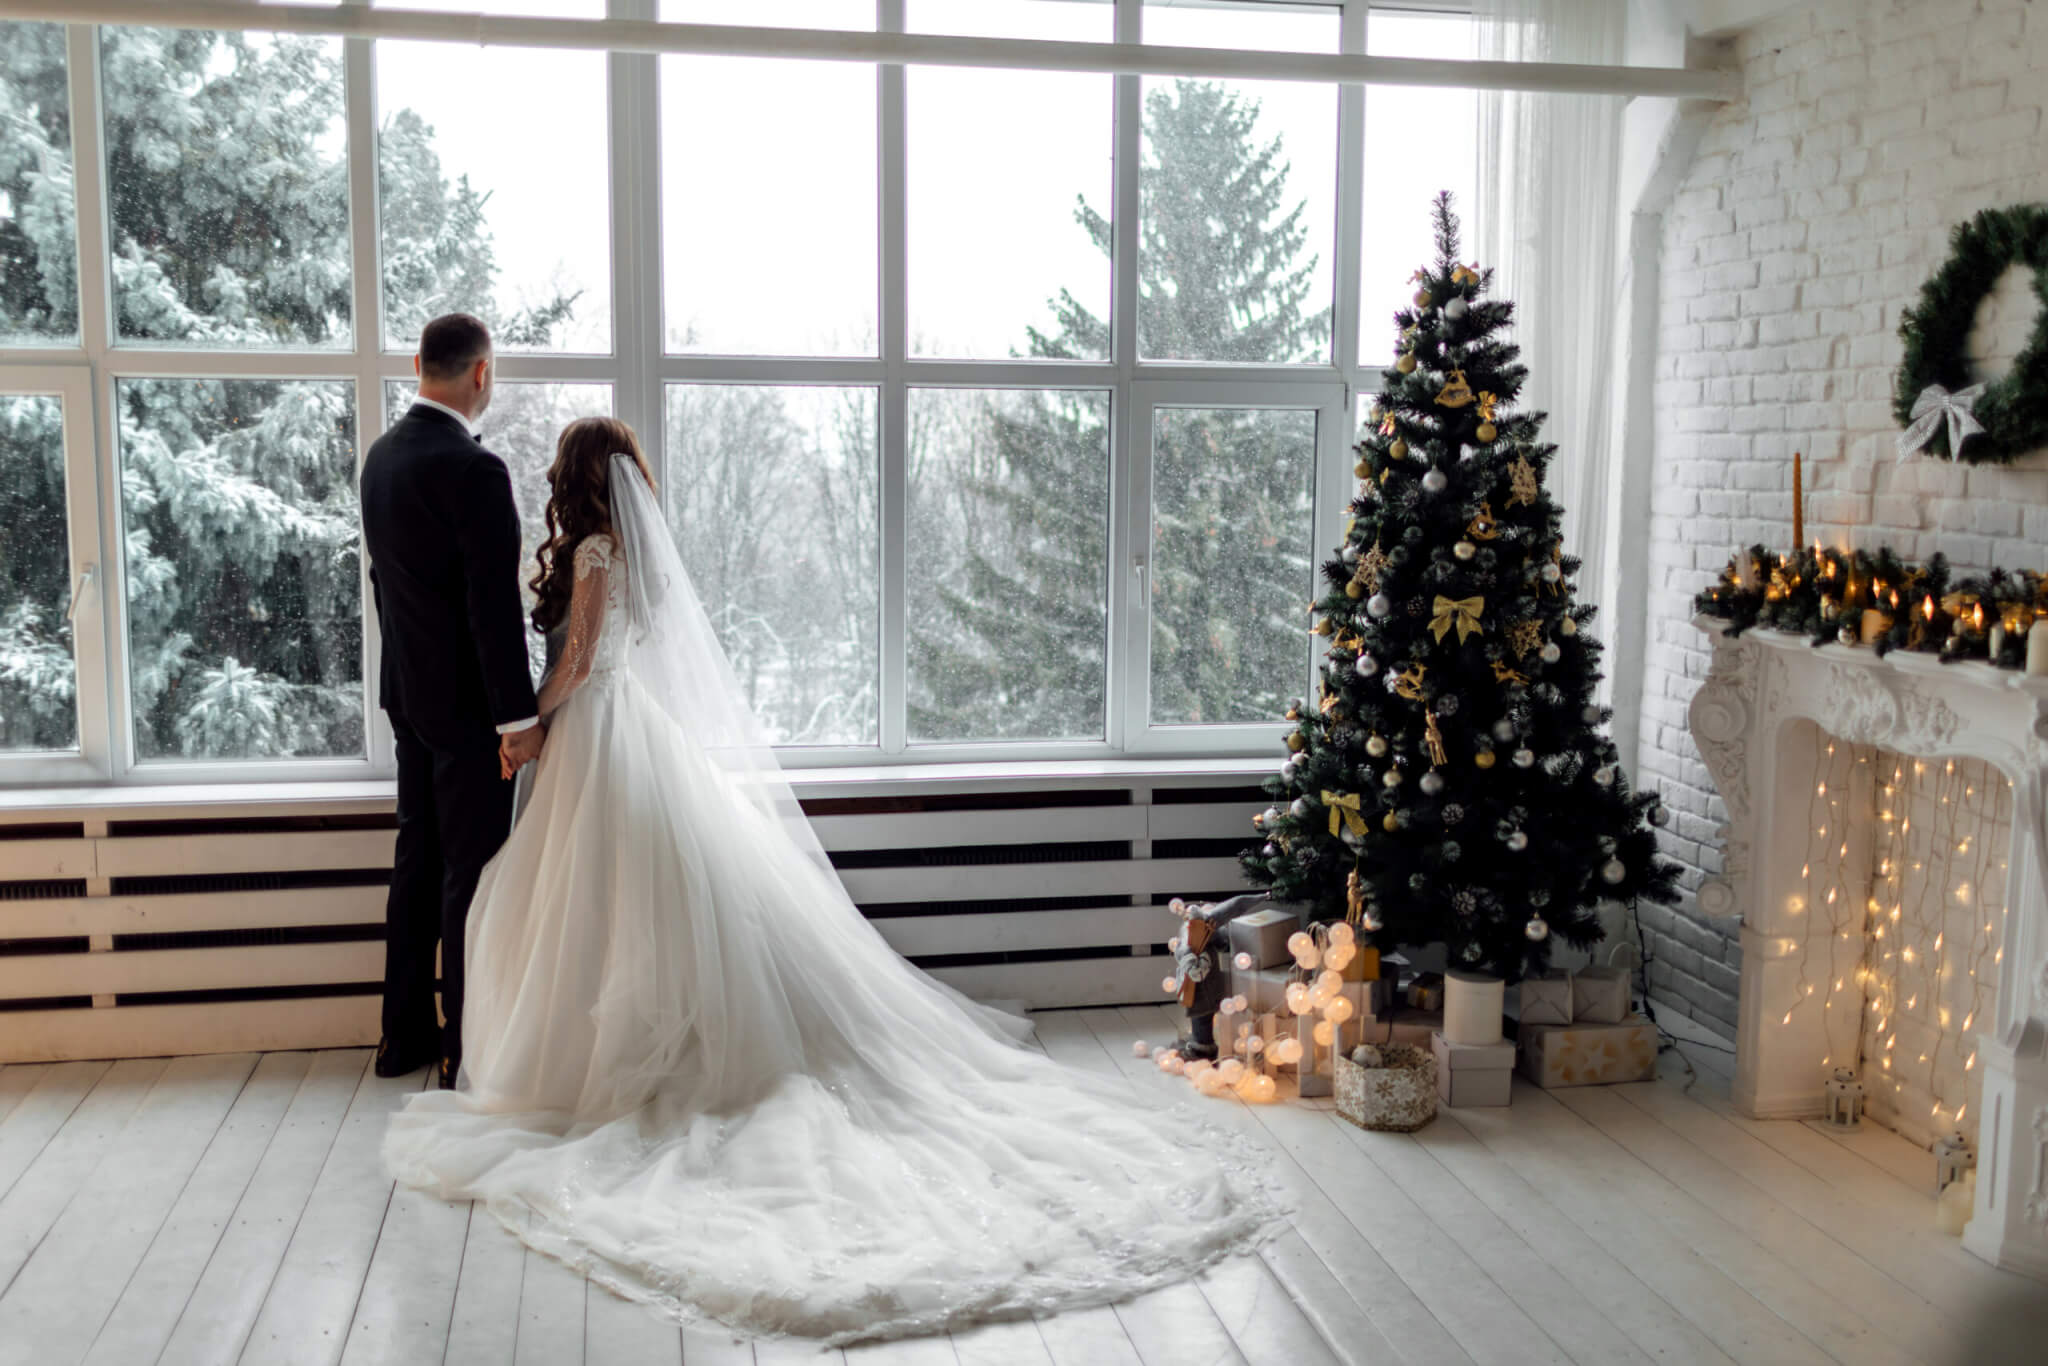 The Pros and Cons of Holiday Weddings